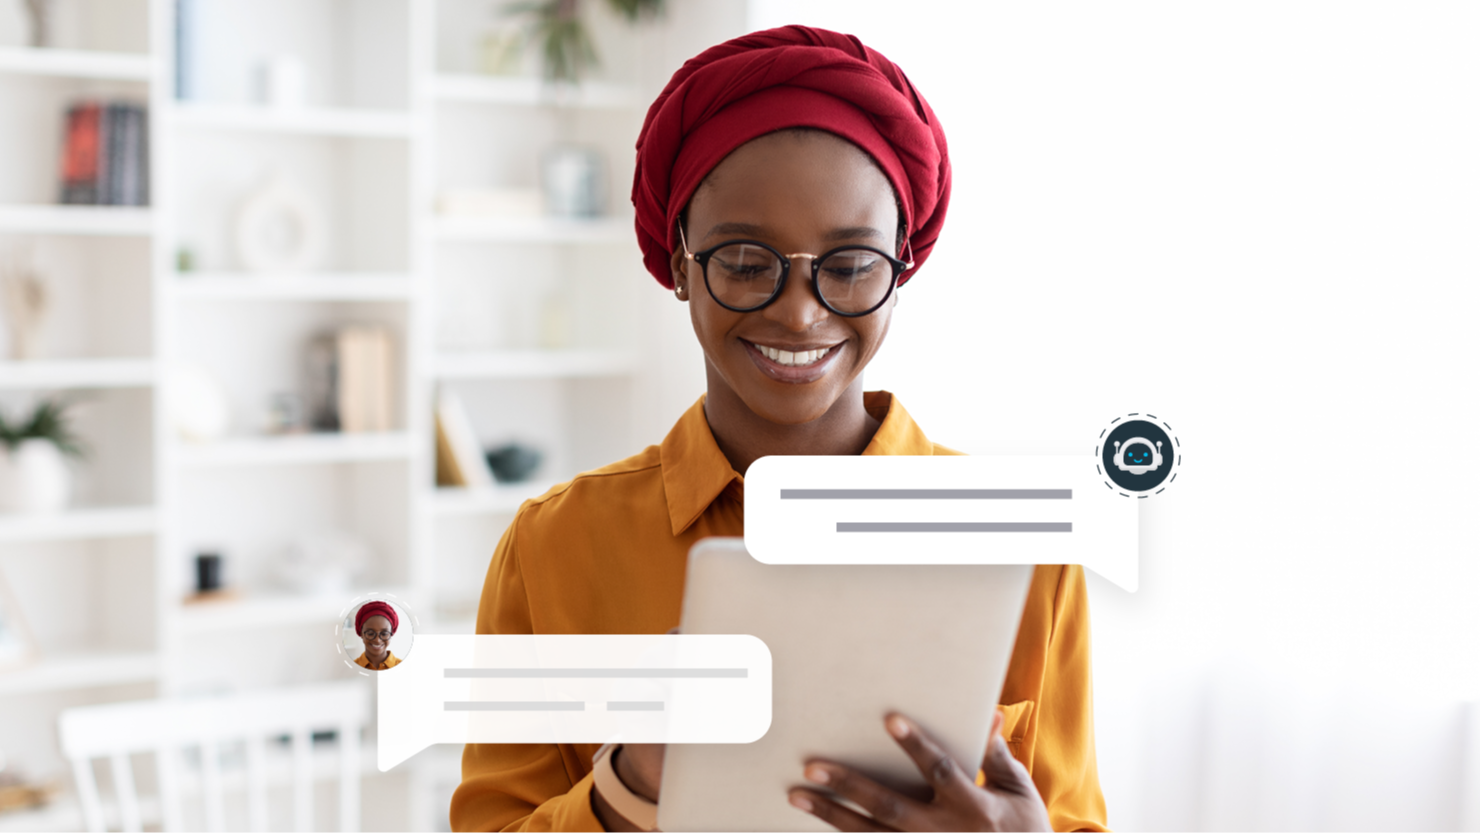 Chatbots for Real-Time Customer Support